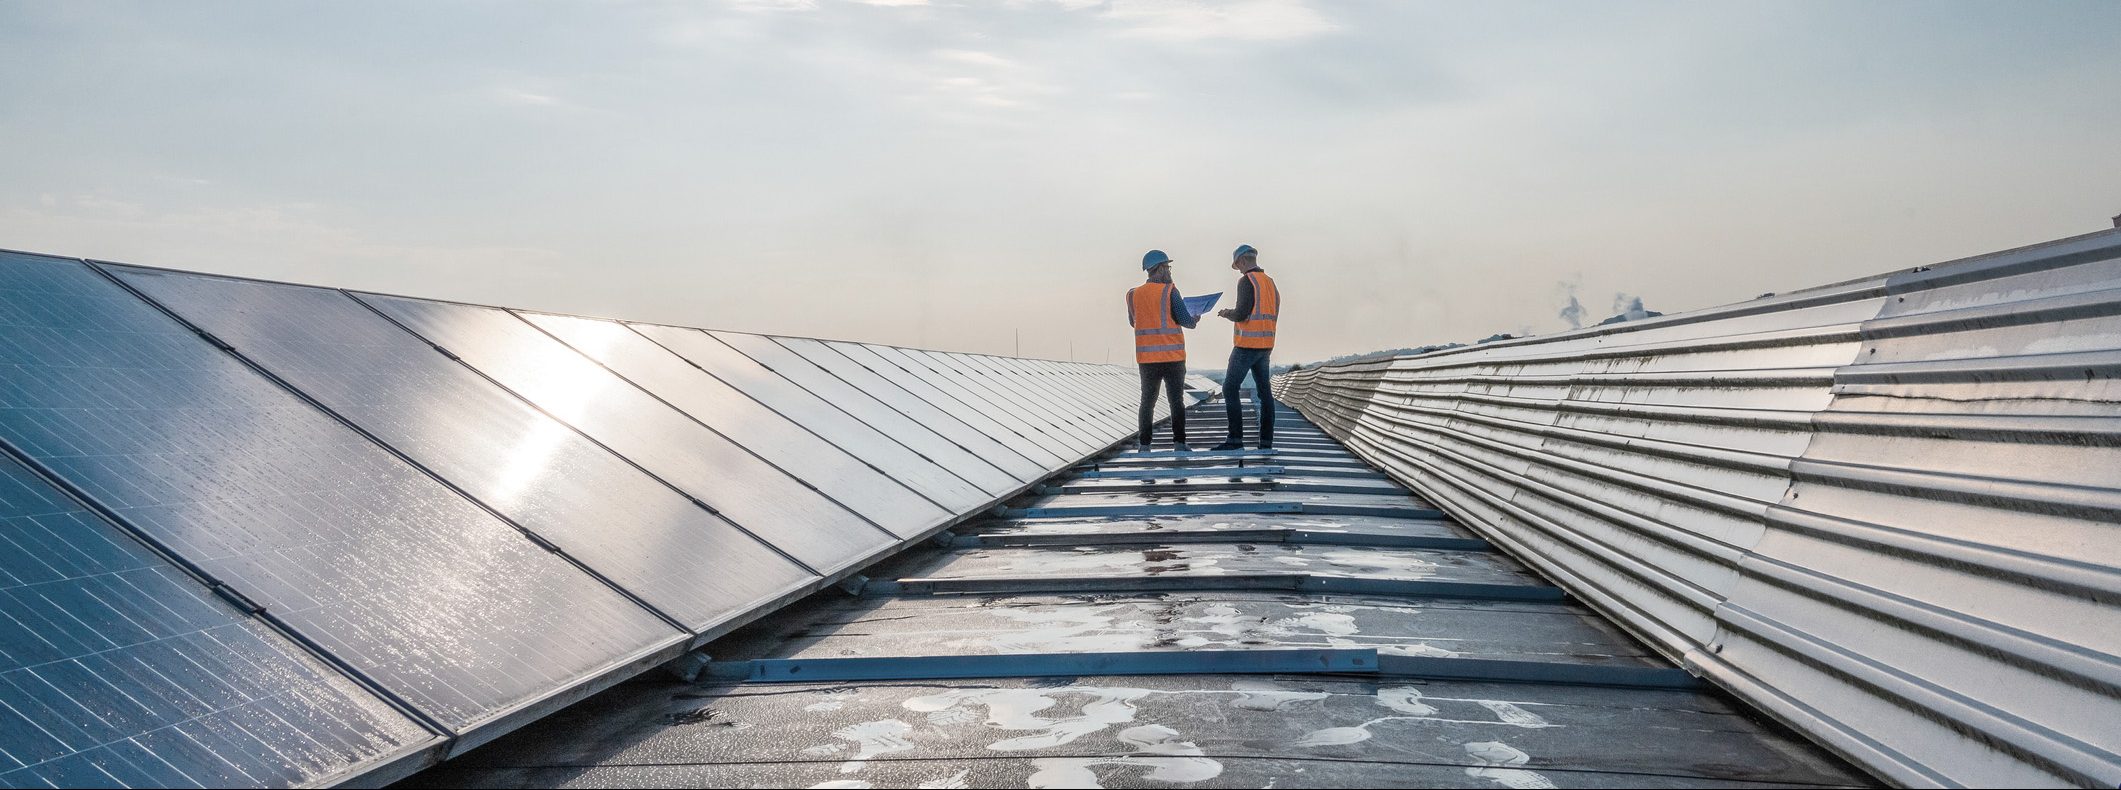 two-technicians-in-distance-discussing-between-long-rows-of-photovoltaic-panels